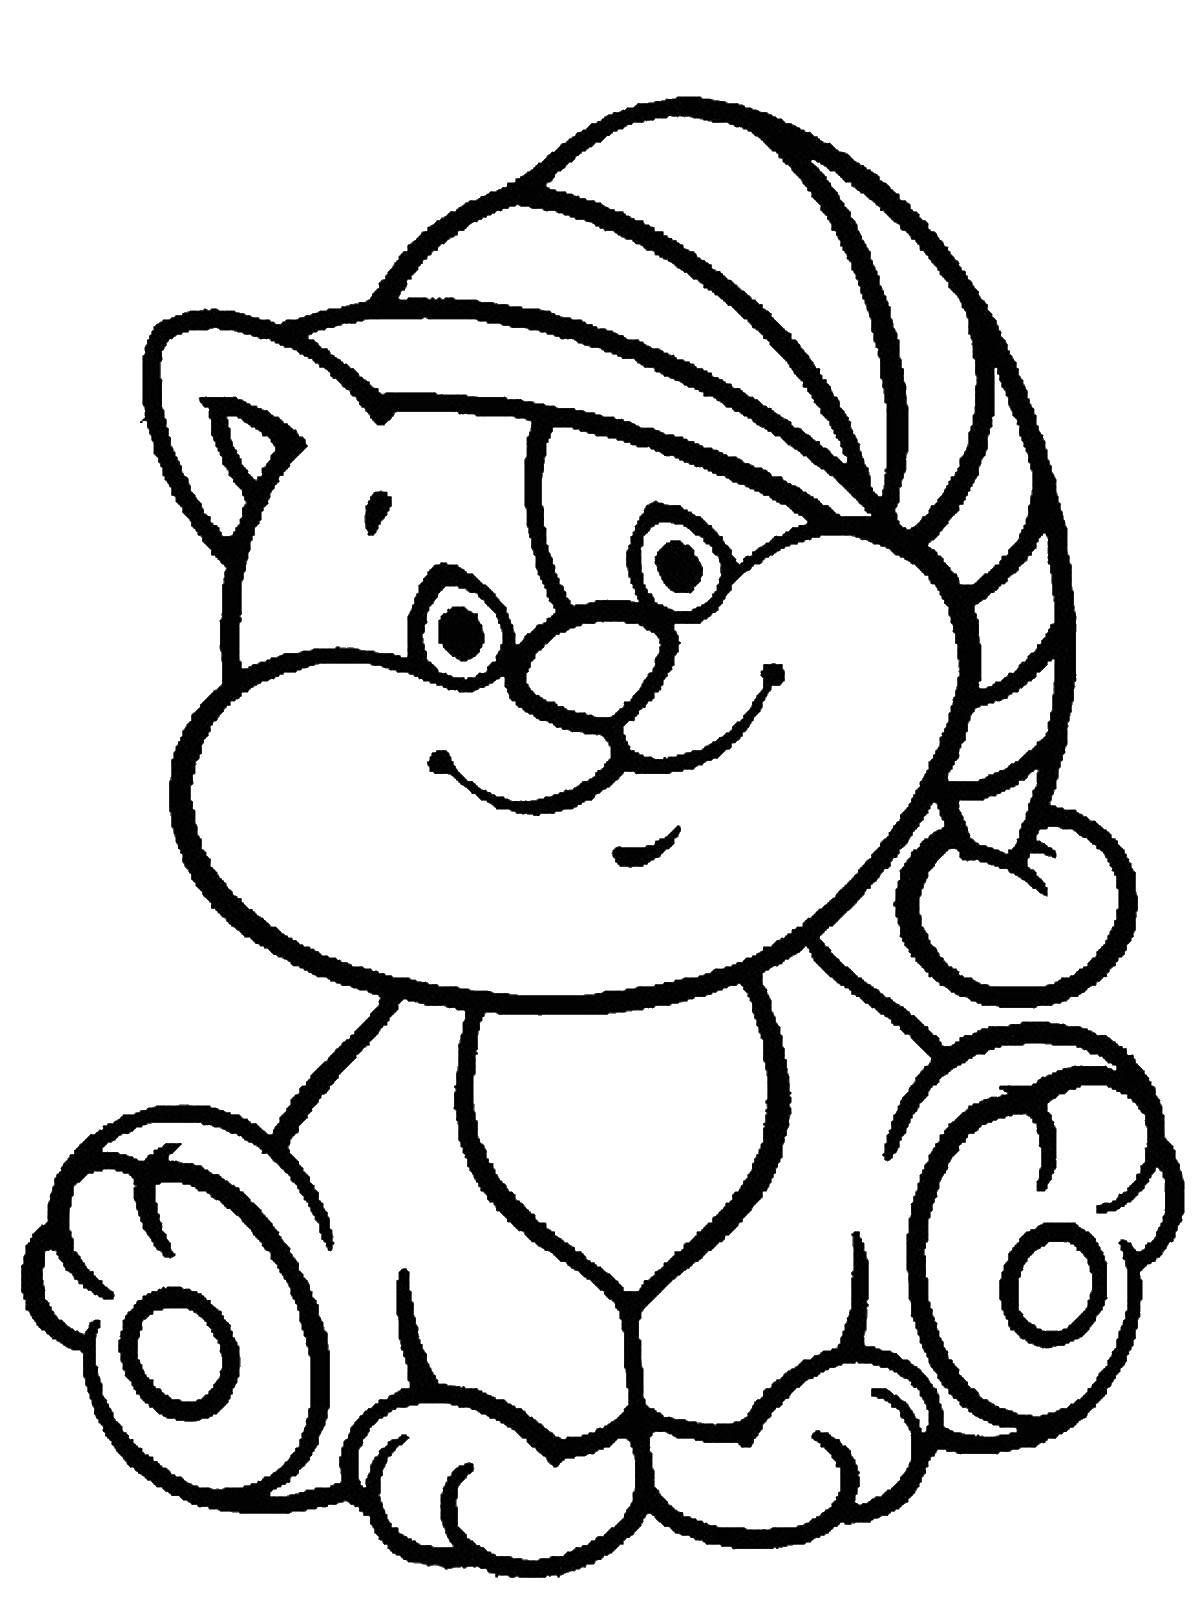 Coloring Cat in the hat. Category little ones. Tags:  Cat.